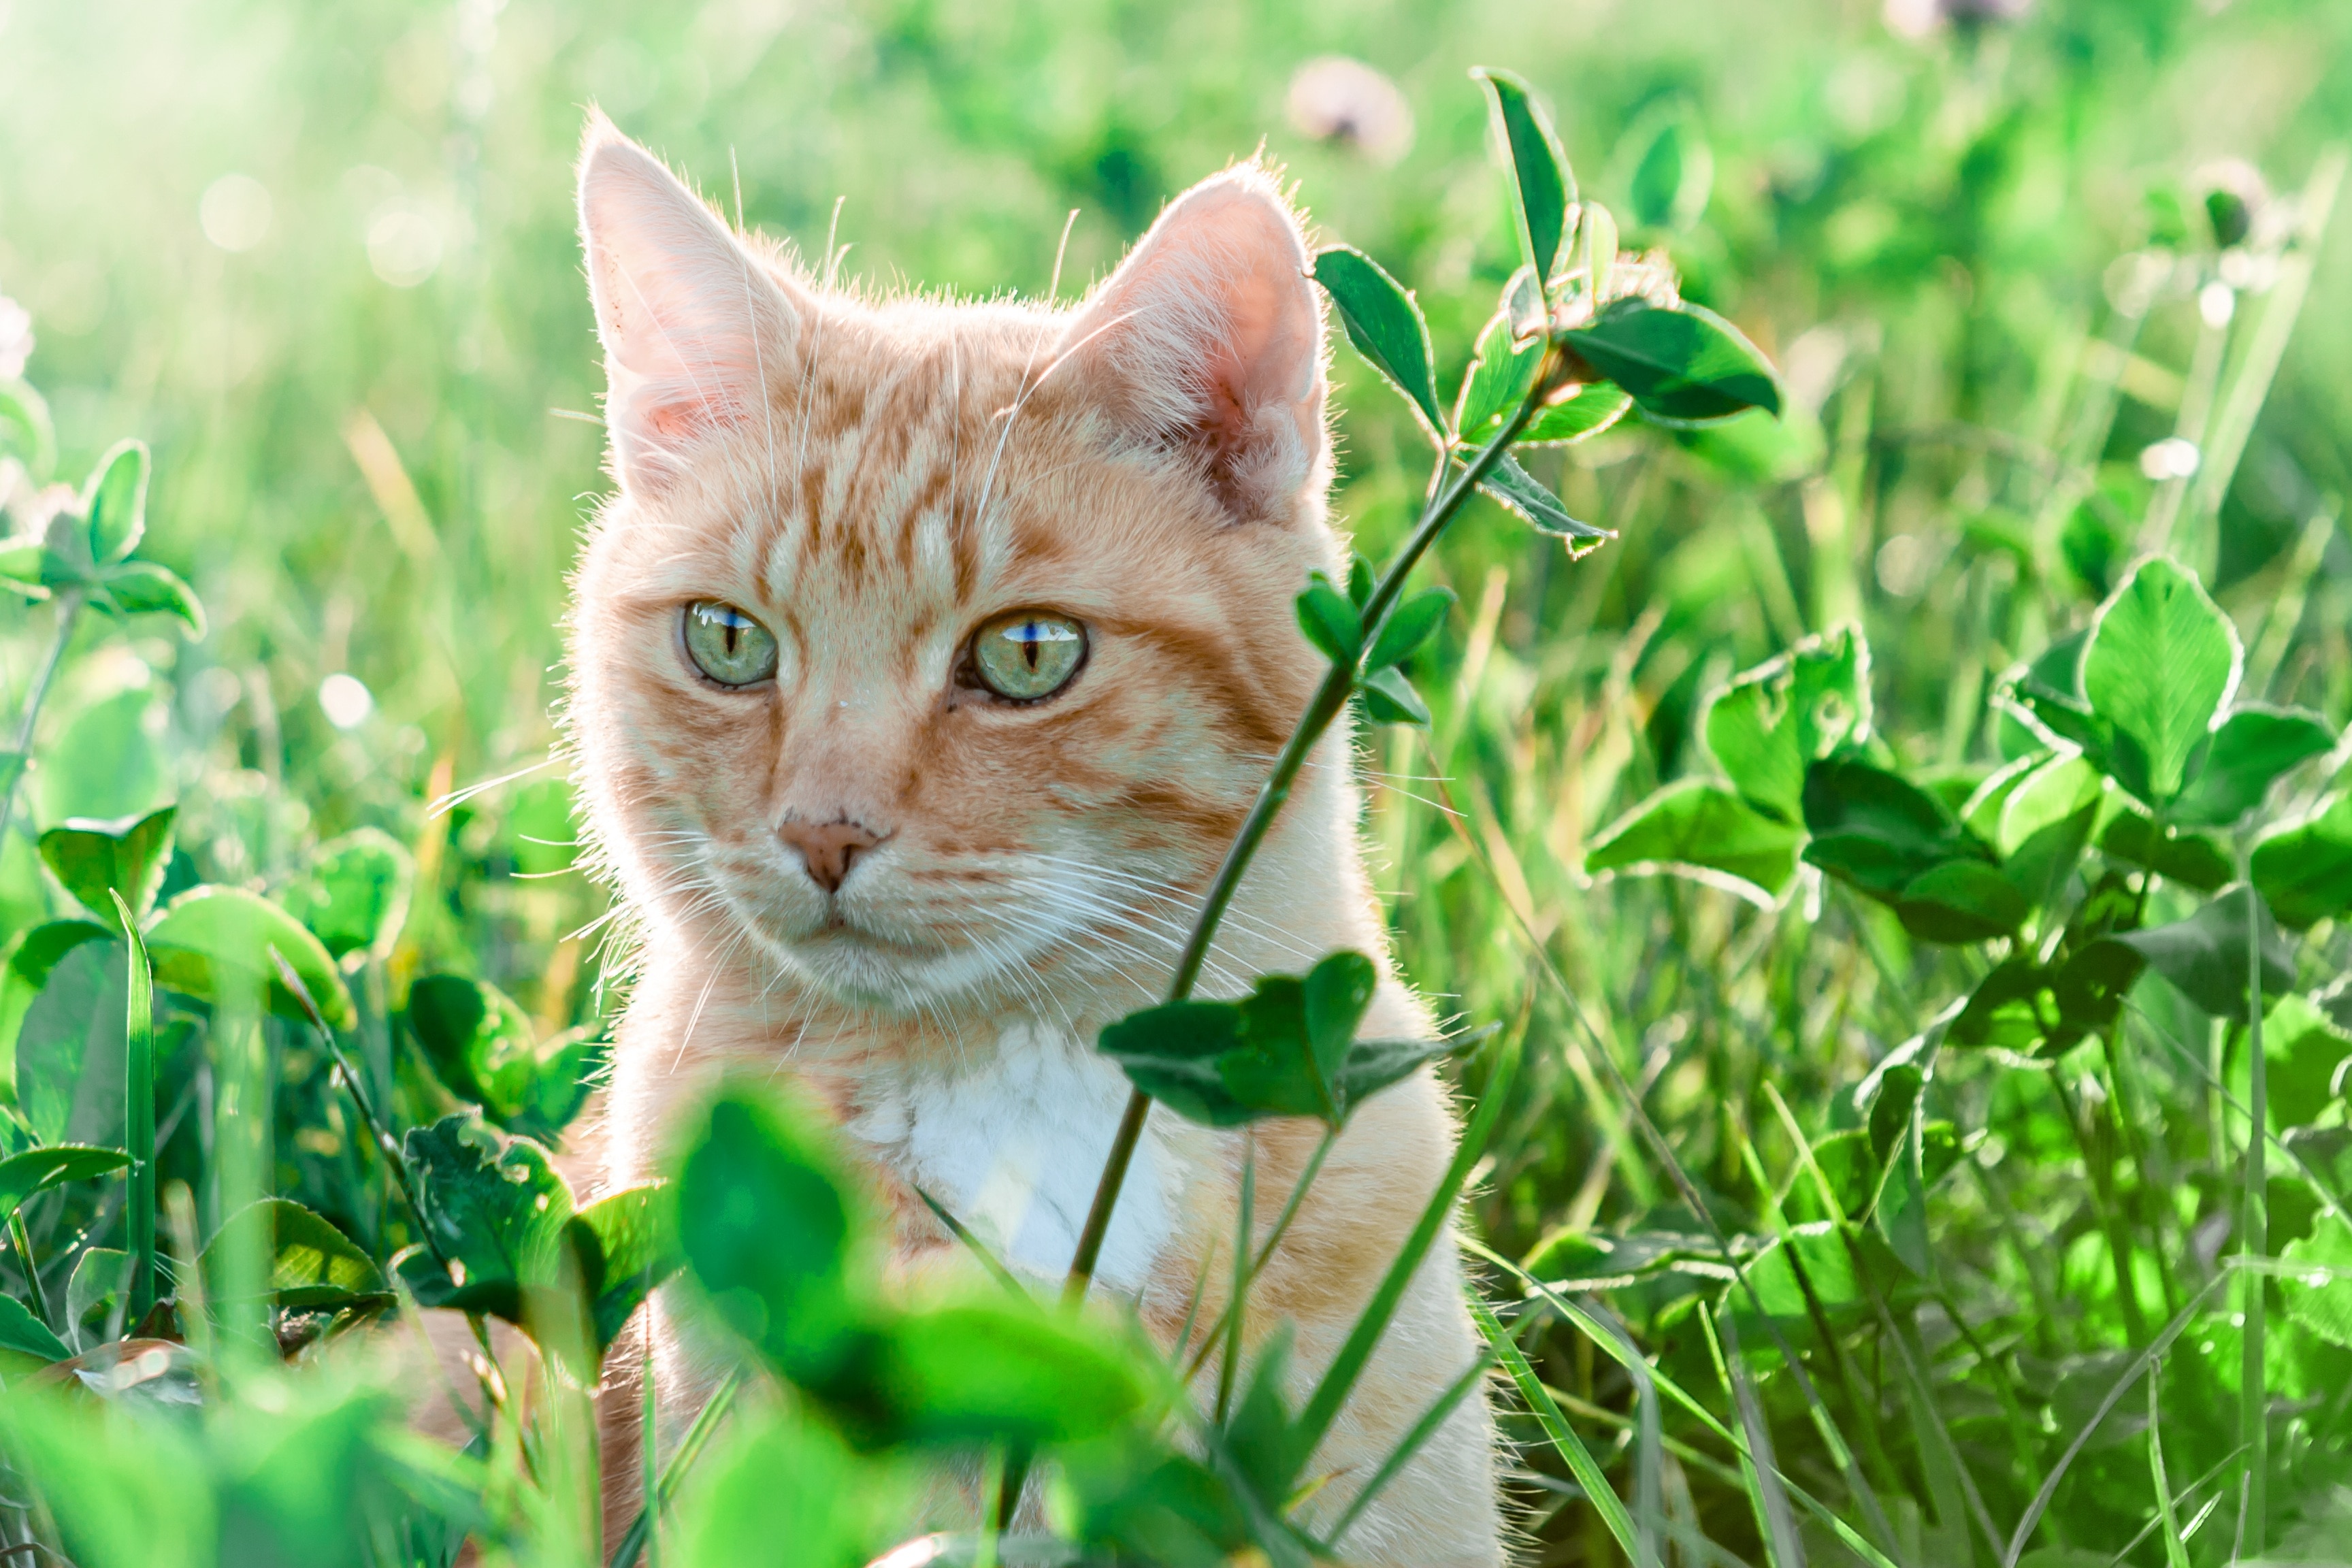 white and orange cat in green grass during daytime